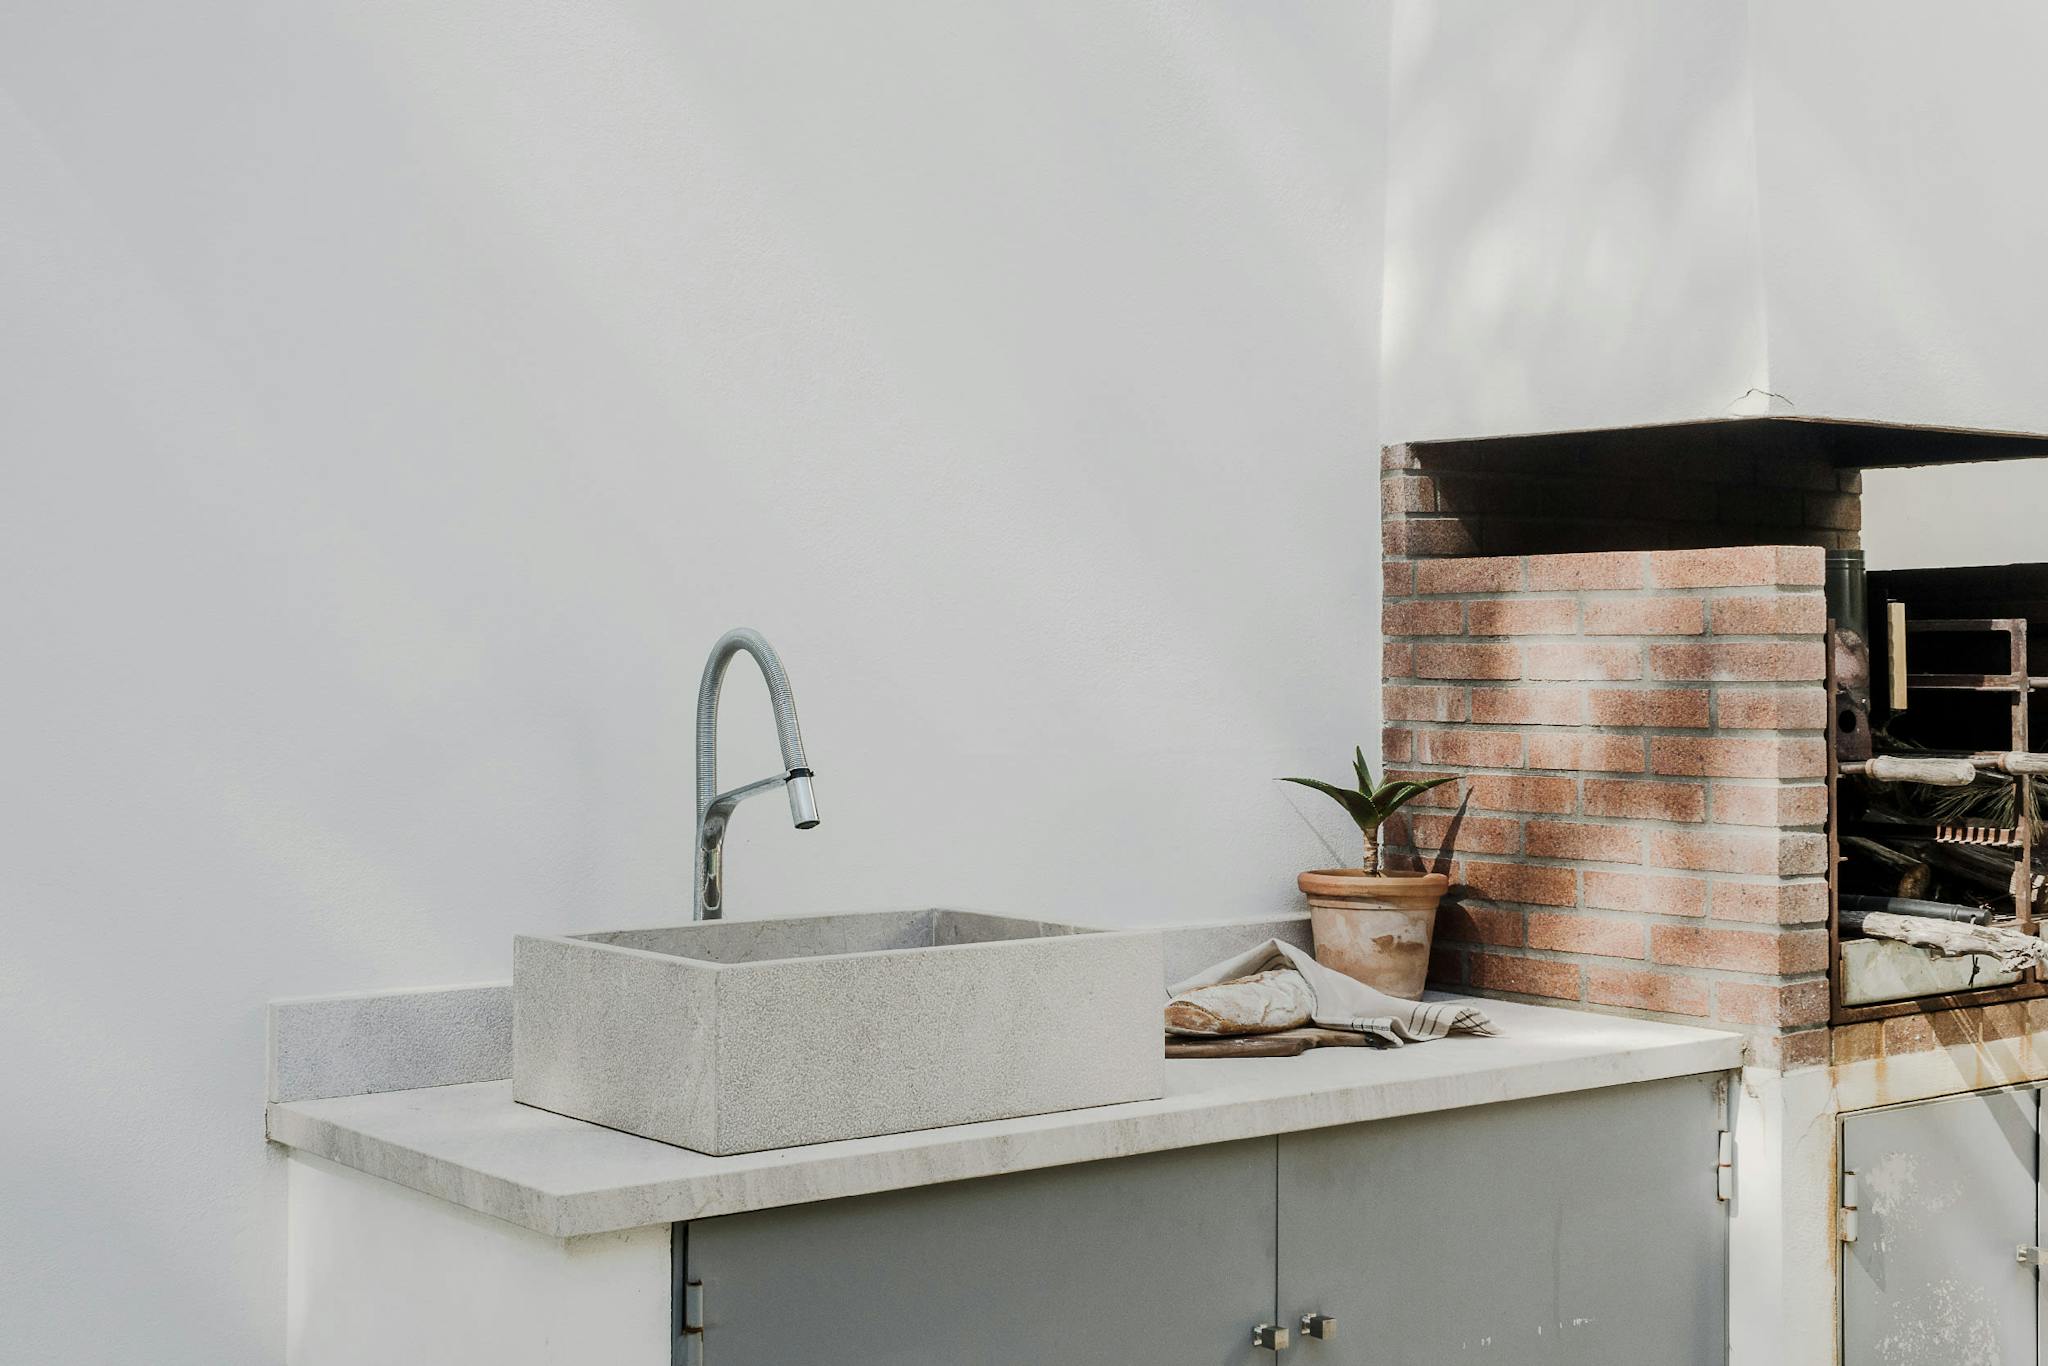 The image features a modern kitchen with a large sink, a stainless steel sink, and a brick oven.